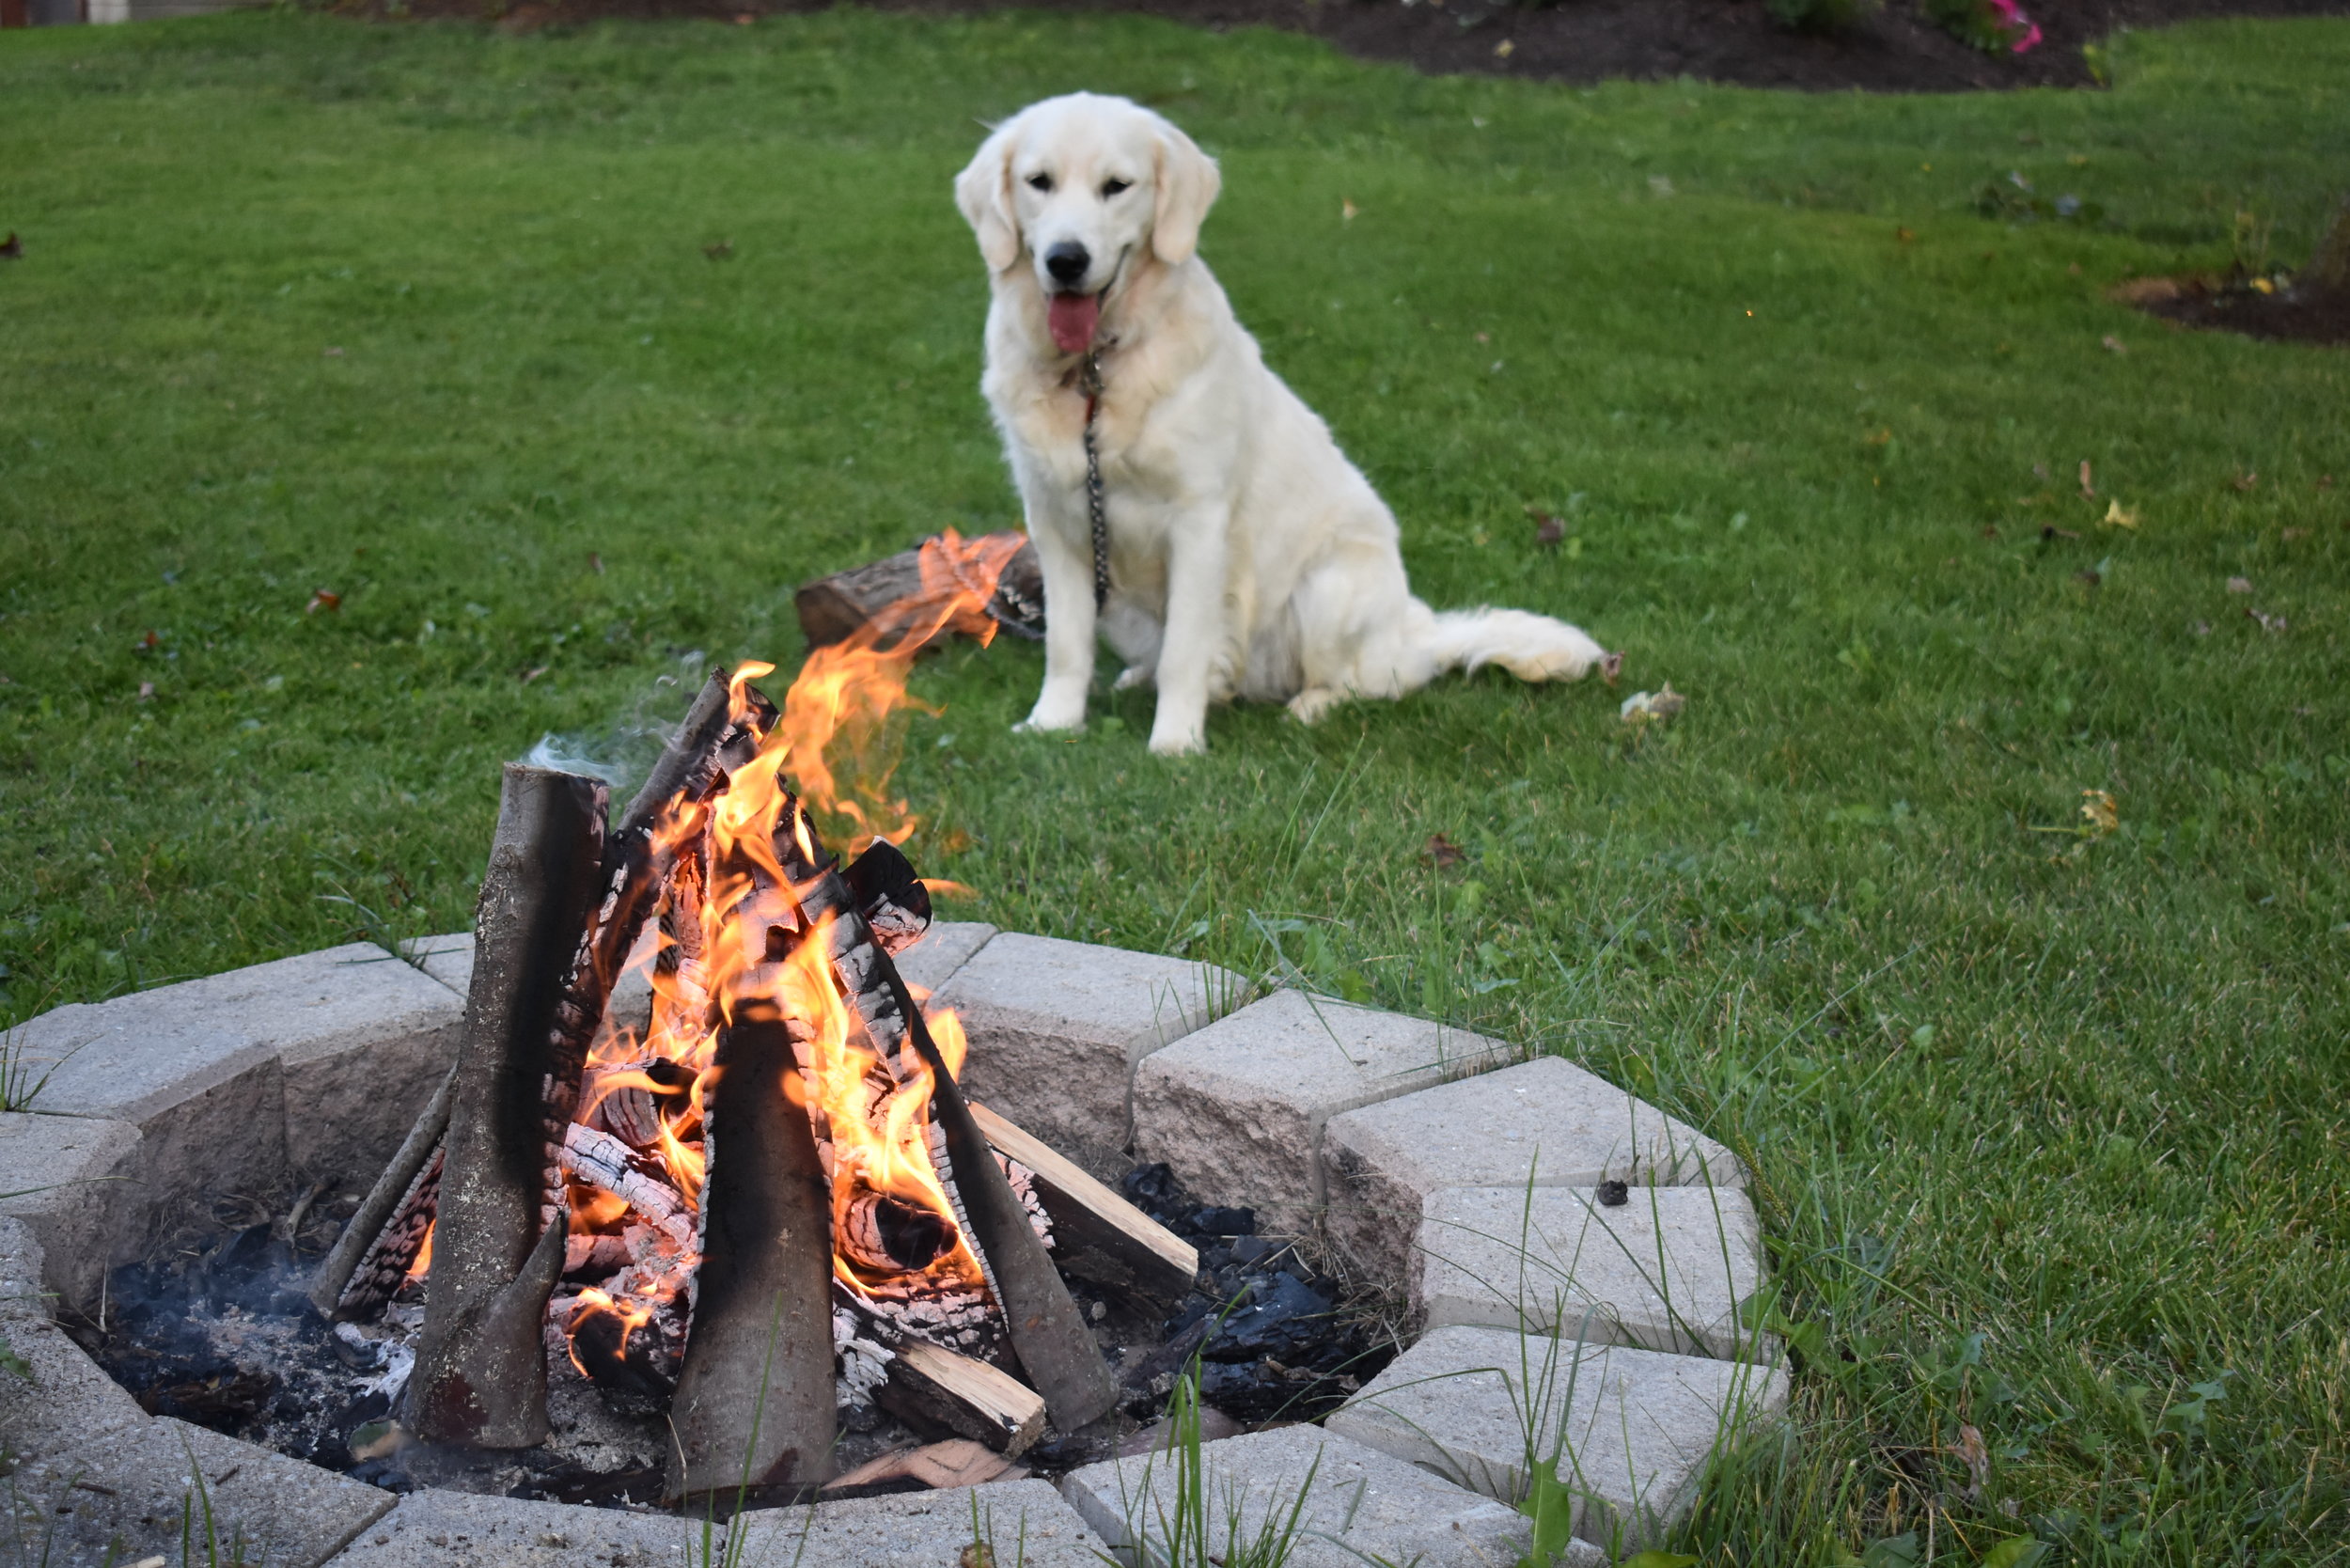  Golden reteriver dog enjoying a campfire on a farm in Kitchener-Waterloo area where they breed goldendoodles 